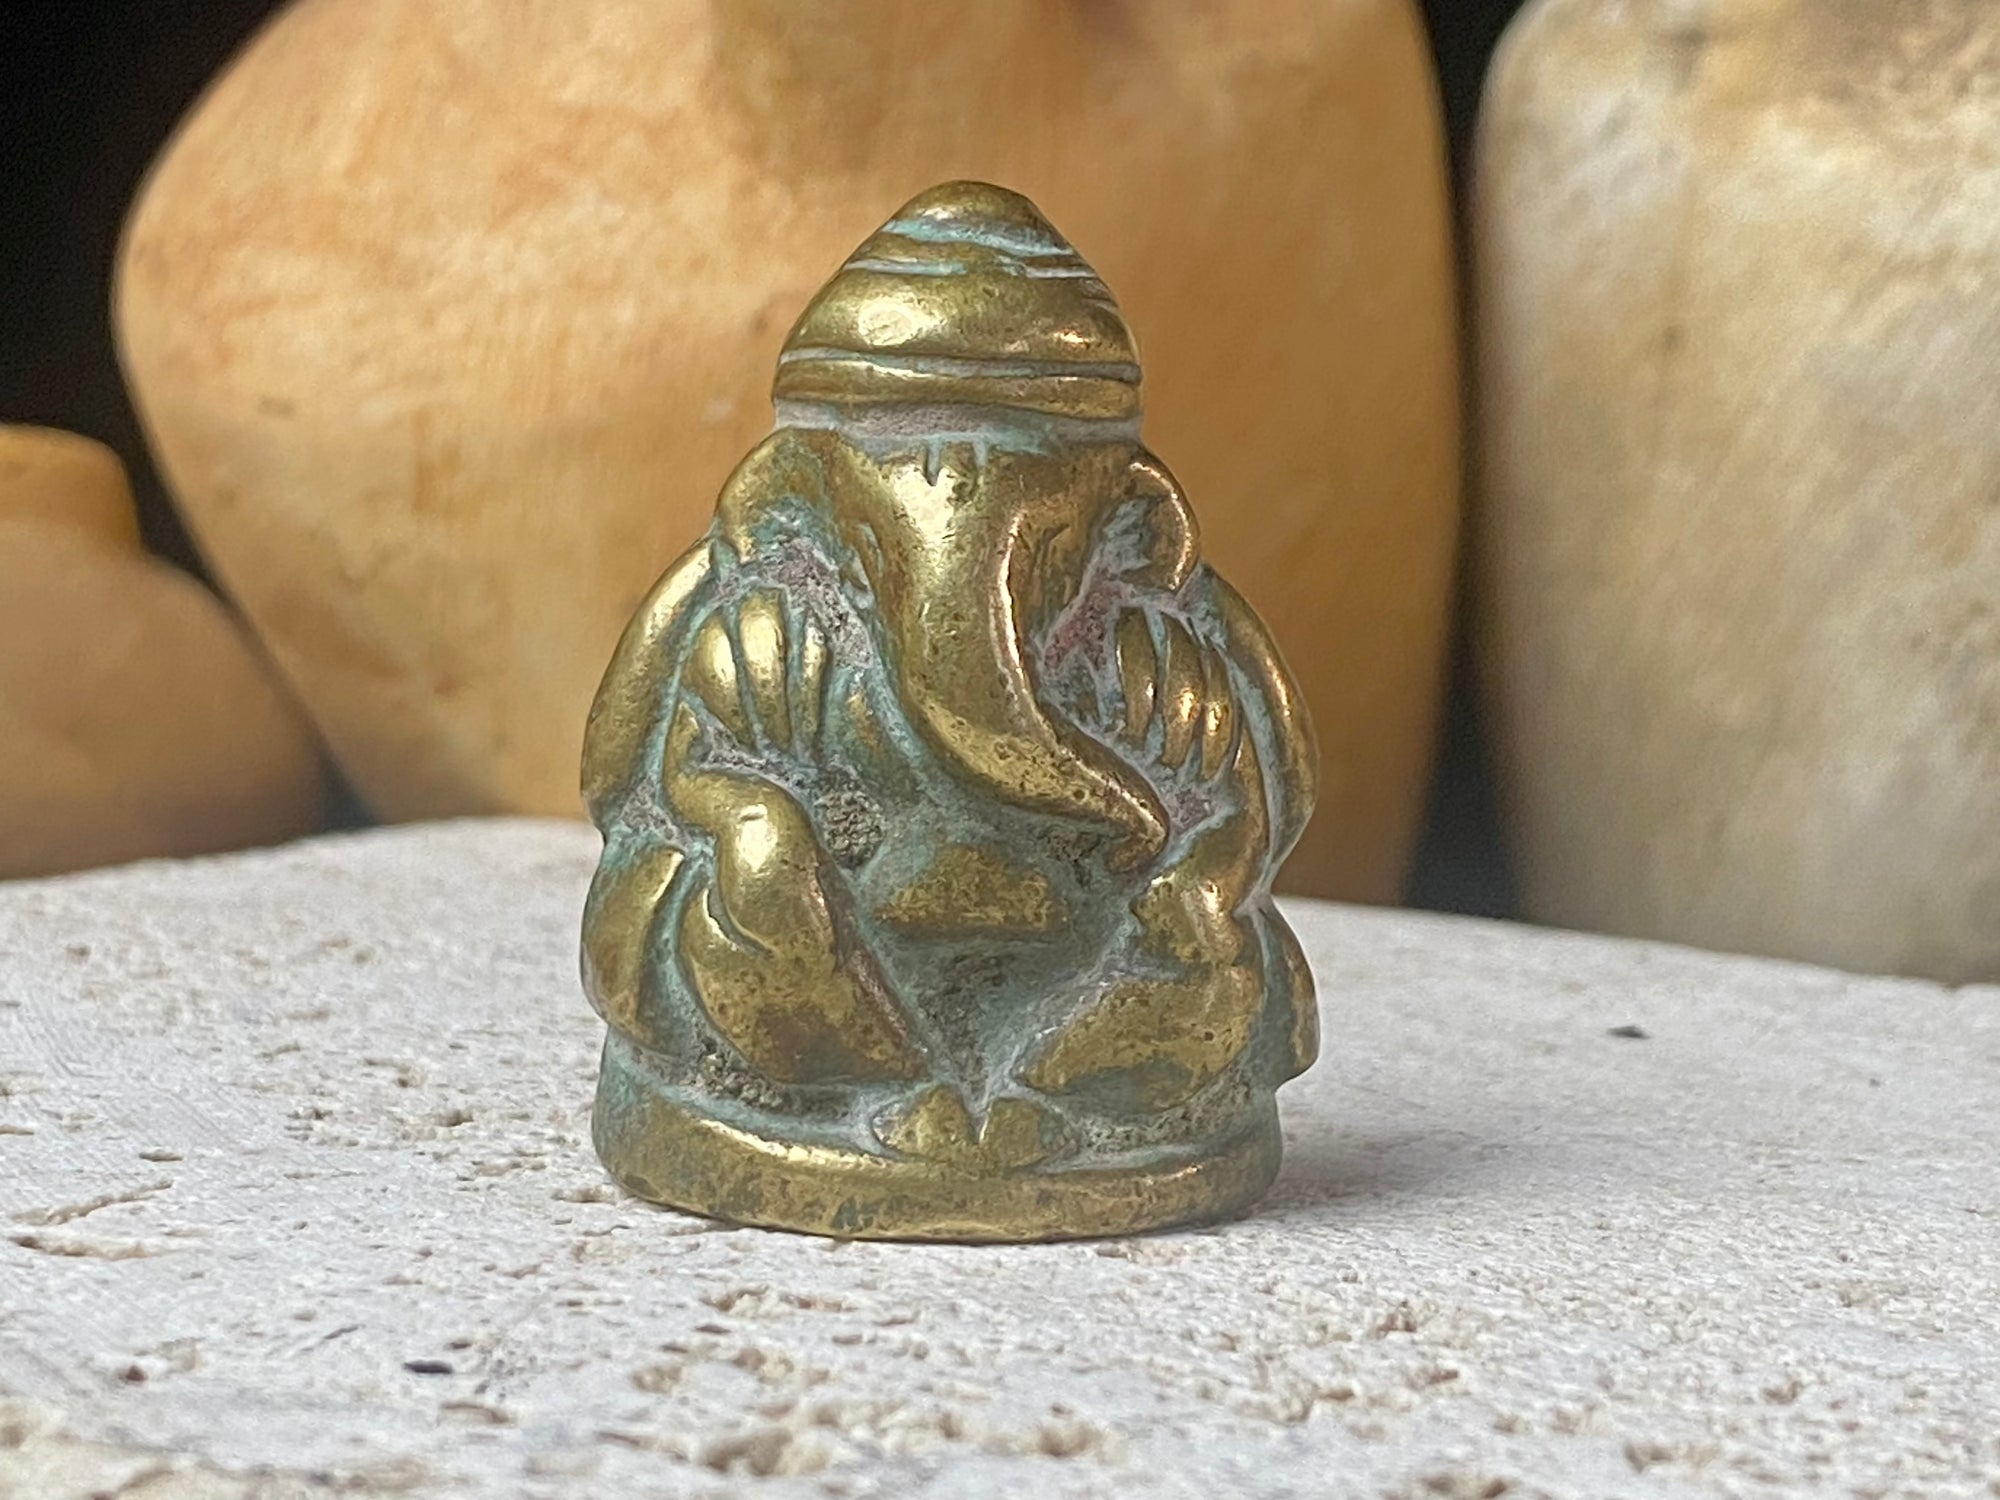 Pocket Ganesh statue cast in brass, with both hands resting on his knees. This is a beautiful compact casting, ideally suited to a small altar or display, or for carrying in a pocket or bag. Our Ganesh has some age, and is a vintage piece, approximately 40 years old or older. Height 4 cm.